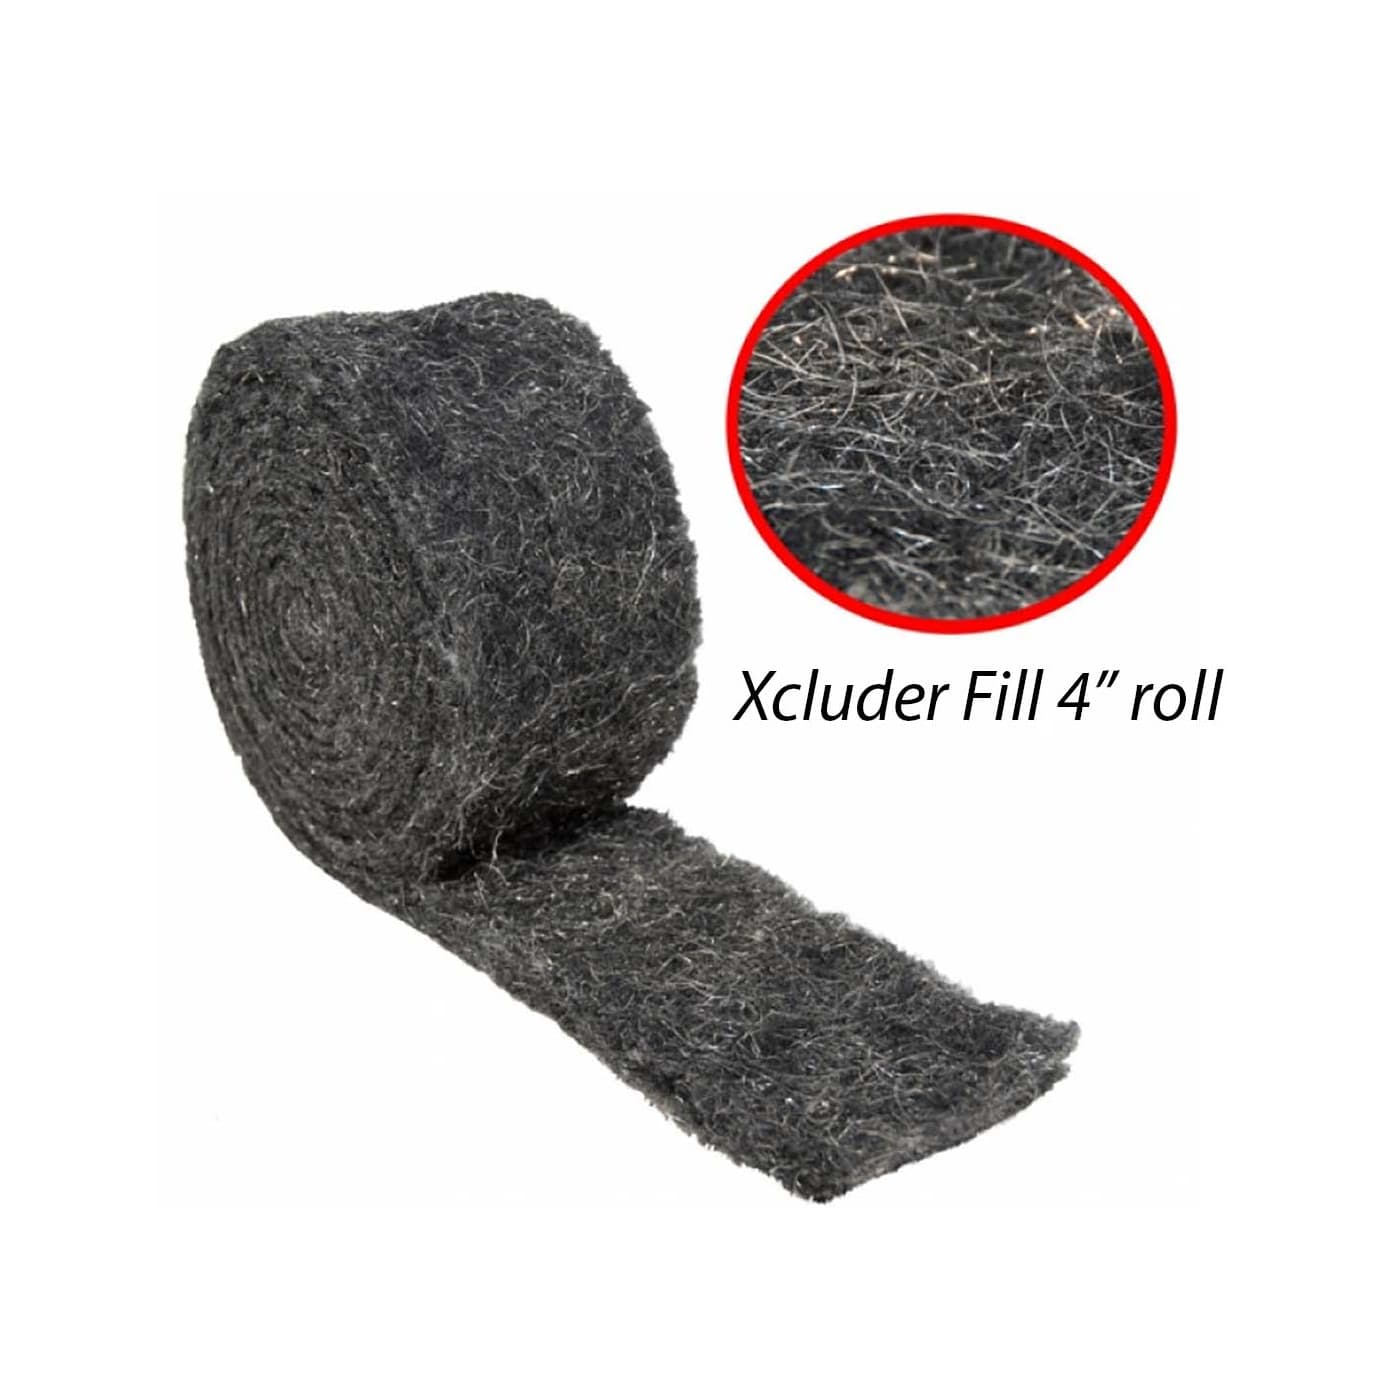 Xcluder Fill Fabric, Rodent Control Excluder